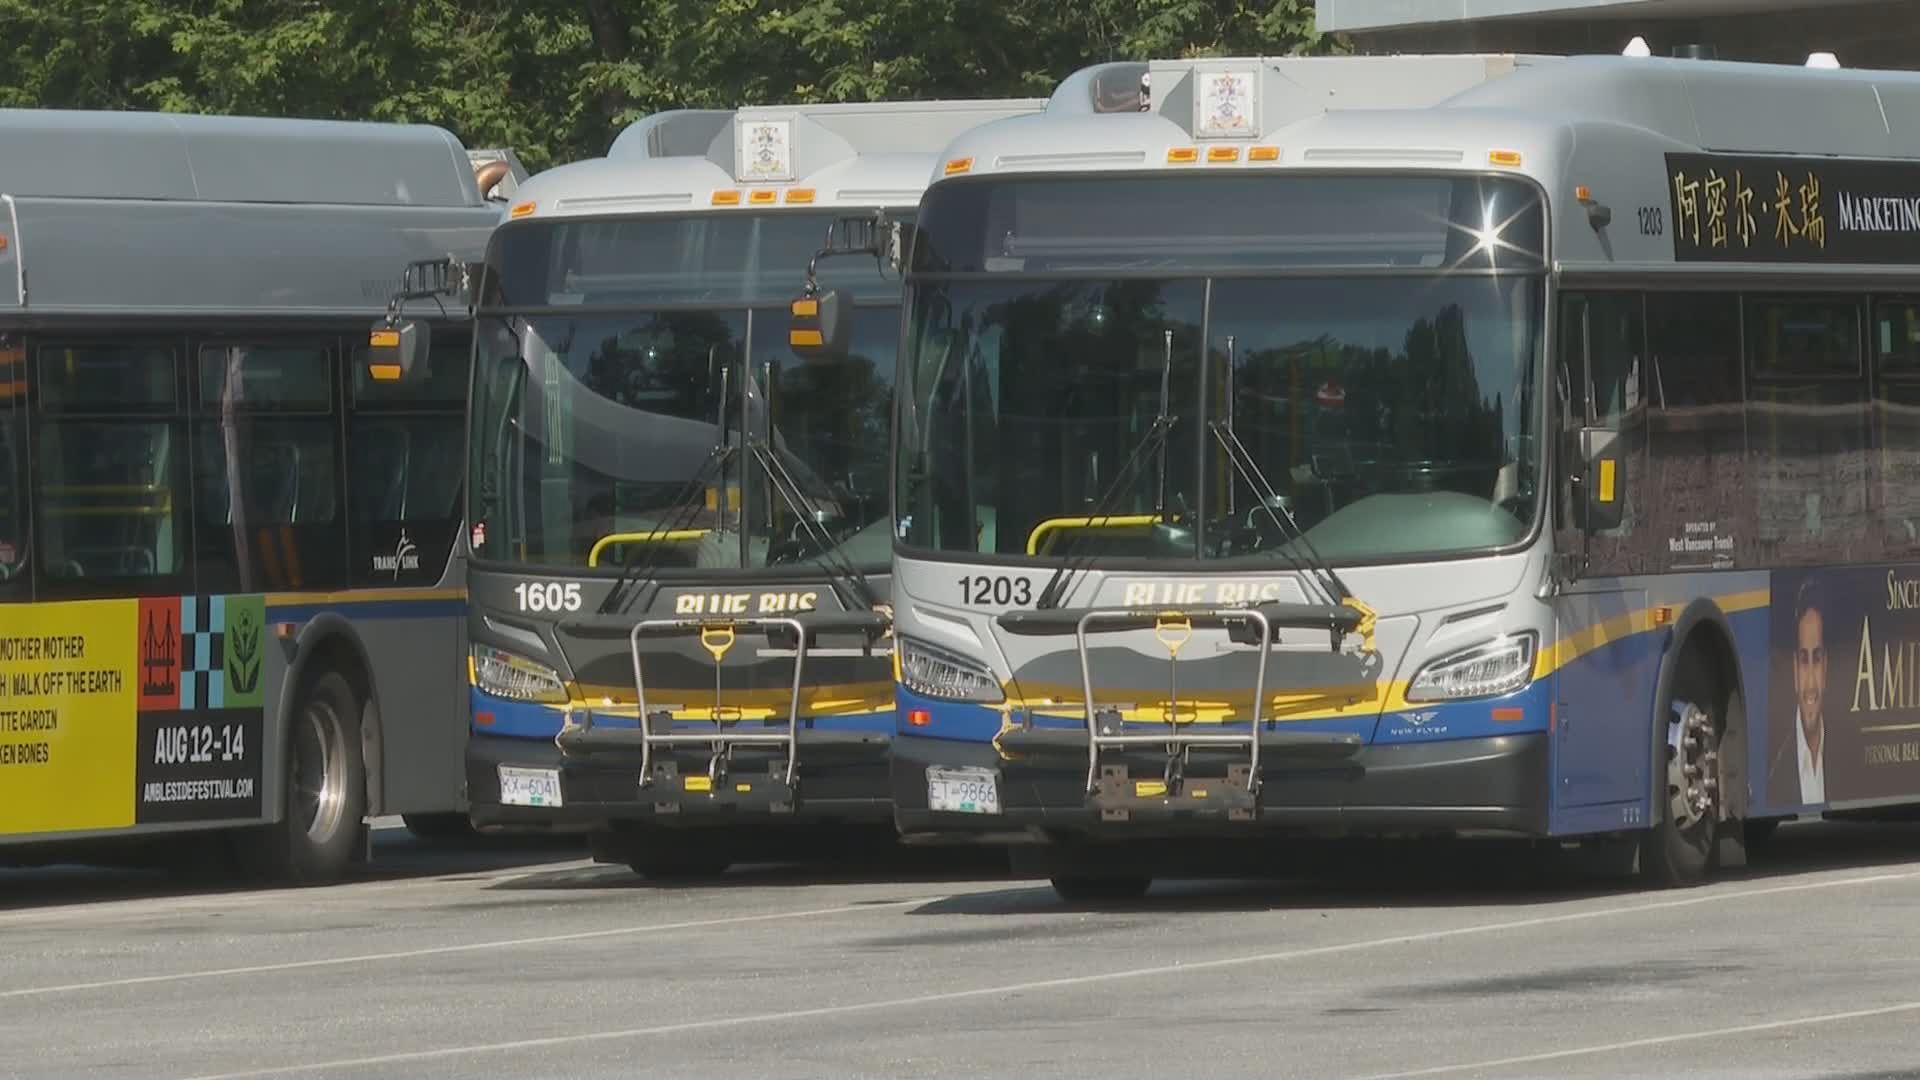 West Vancouver transit workers ratify new contract, averting possible
job action